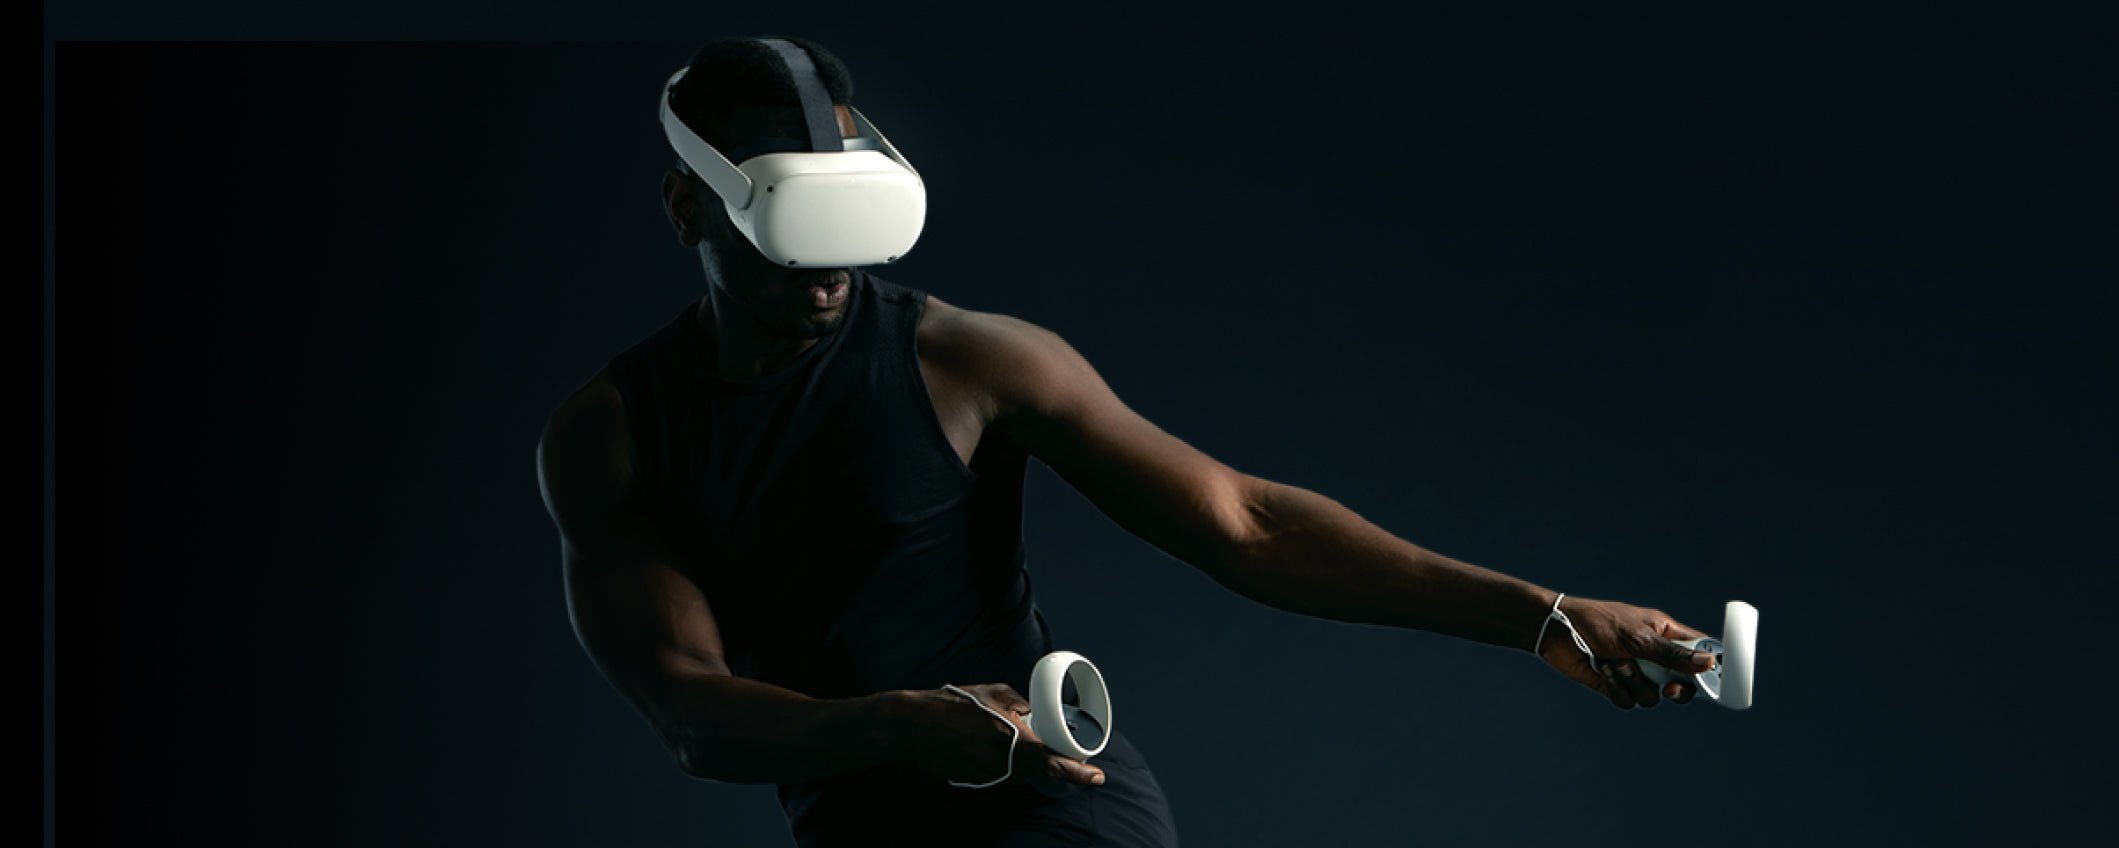 Man working out wearing VR headset and paddles bundle